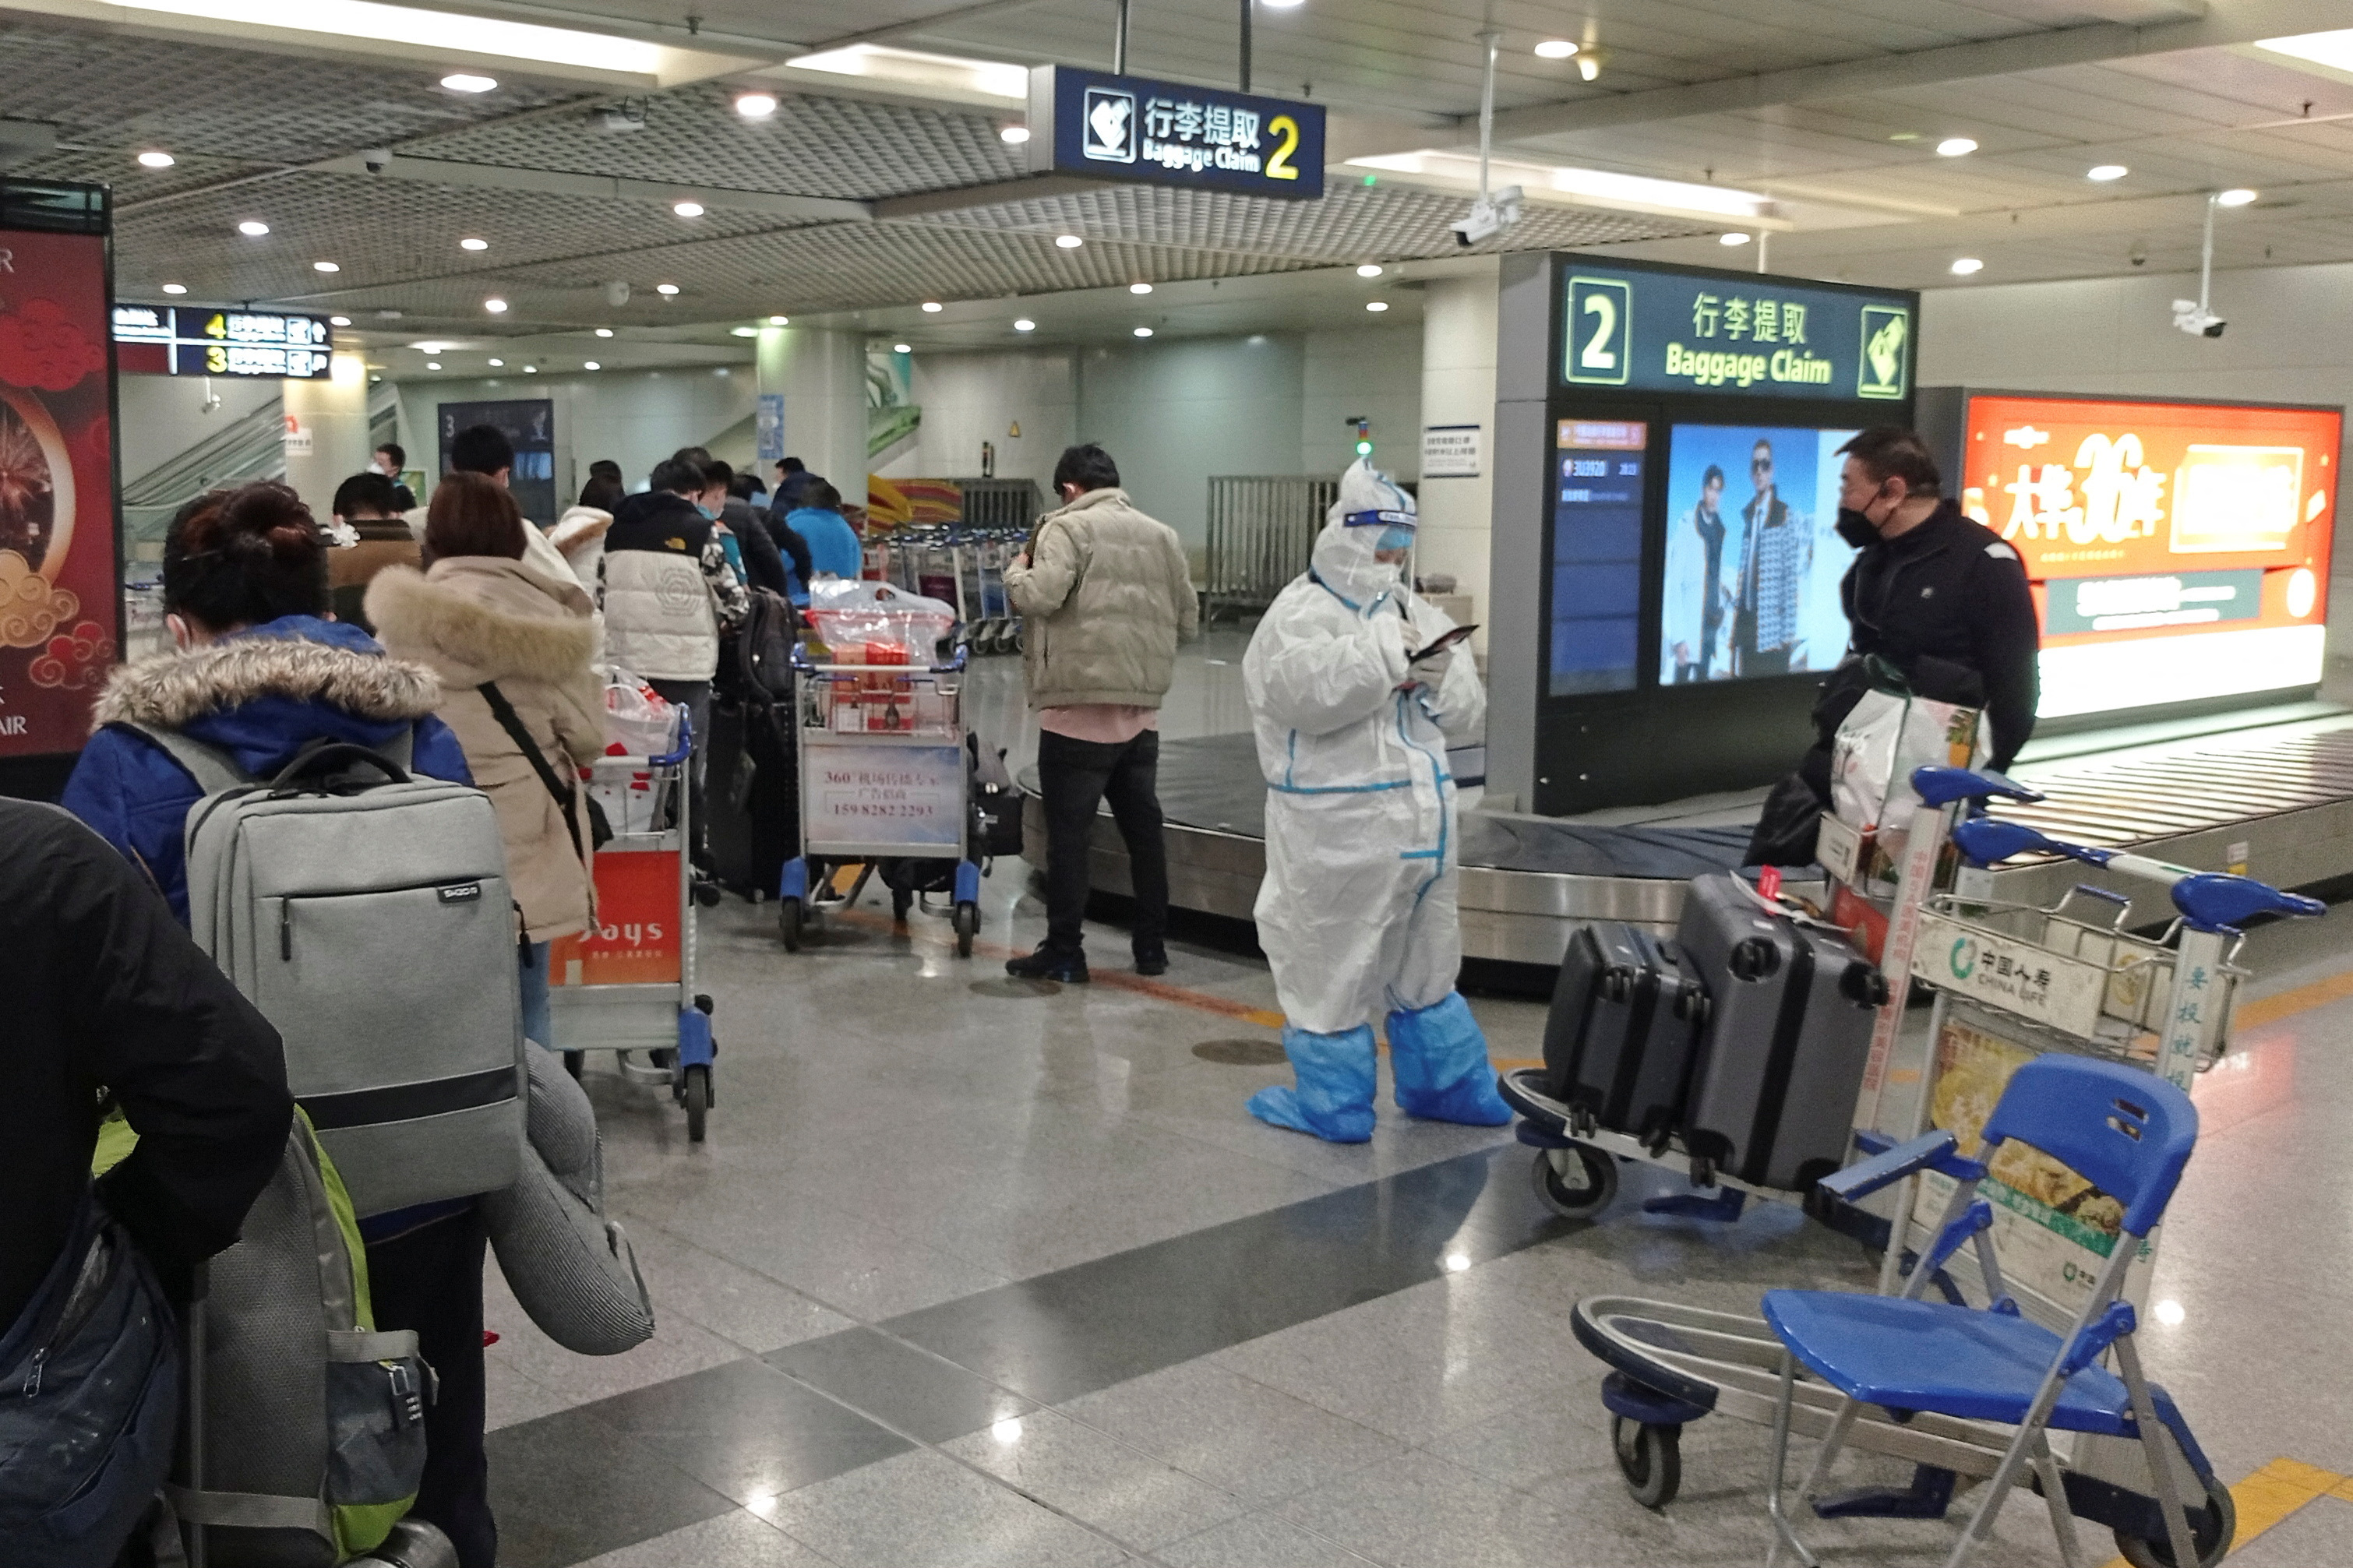 Passengers arriving on international flights wait in line next to a staff member wearing personal protective equipment (PPE) at the airport in Chengdu